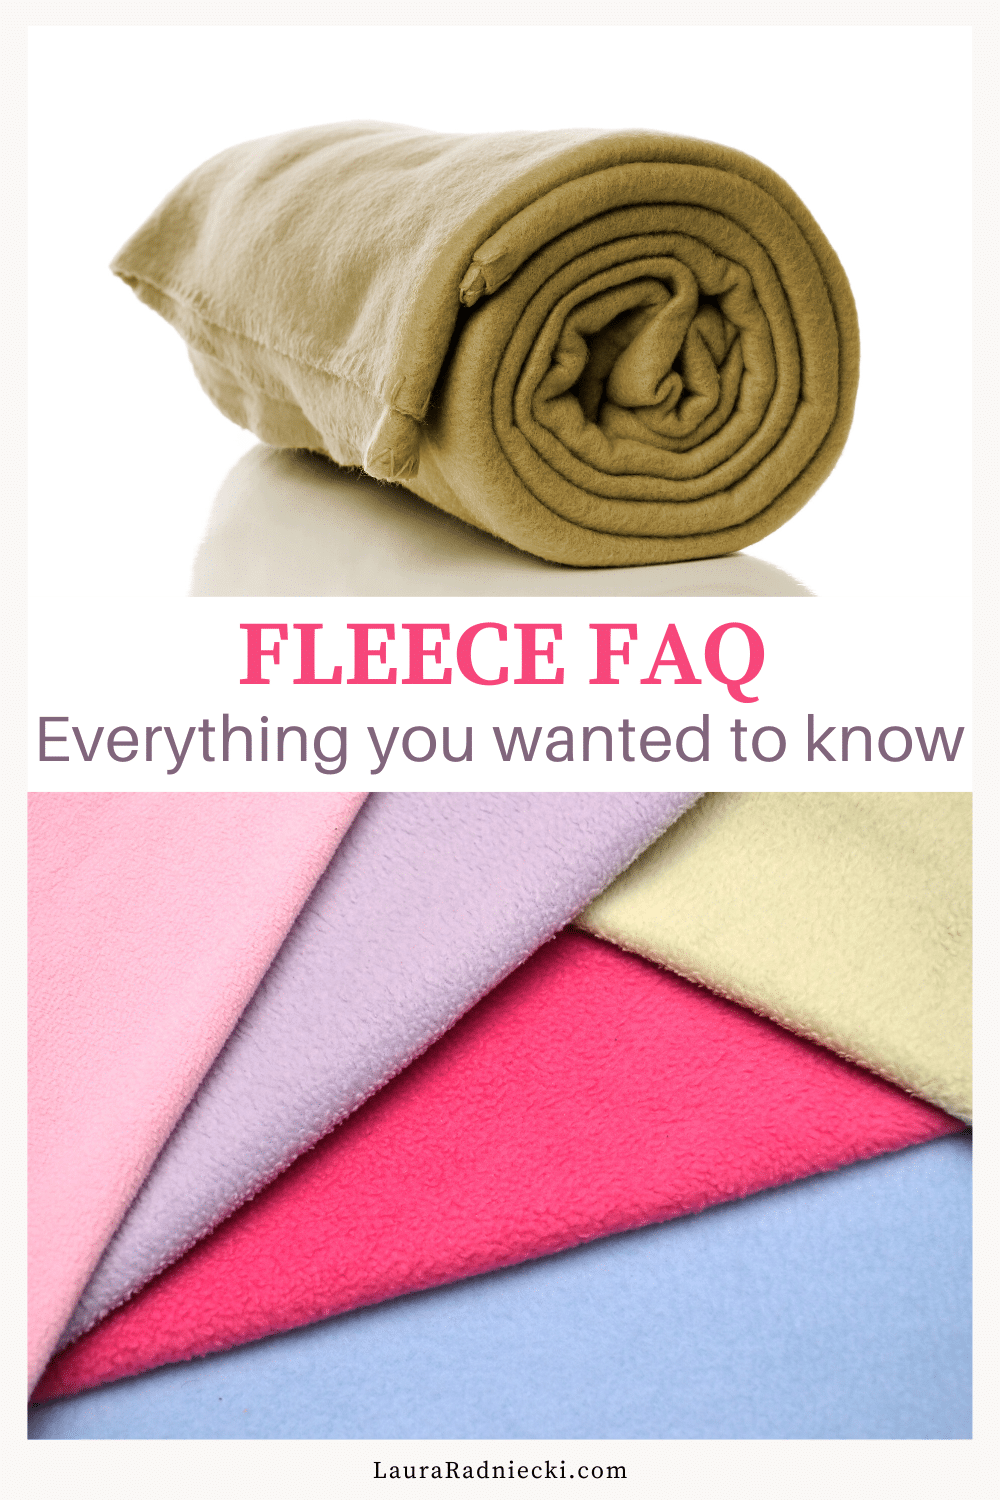 Fleece FAQ - everything you wanted to know about fleece, fleece vs flannel, can you iron fleece, and more